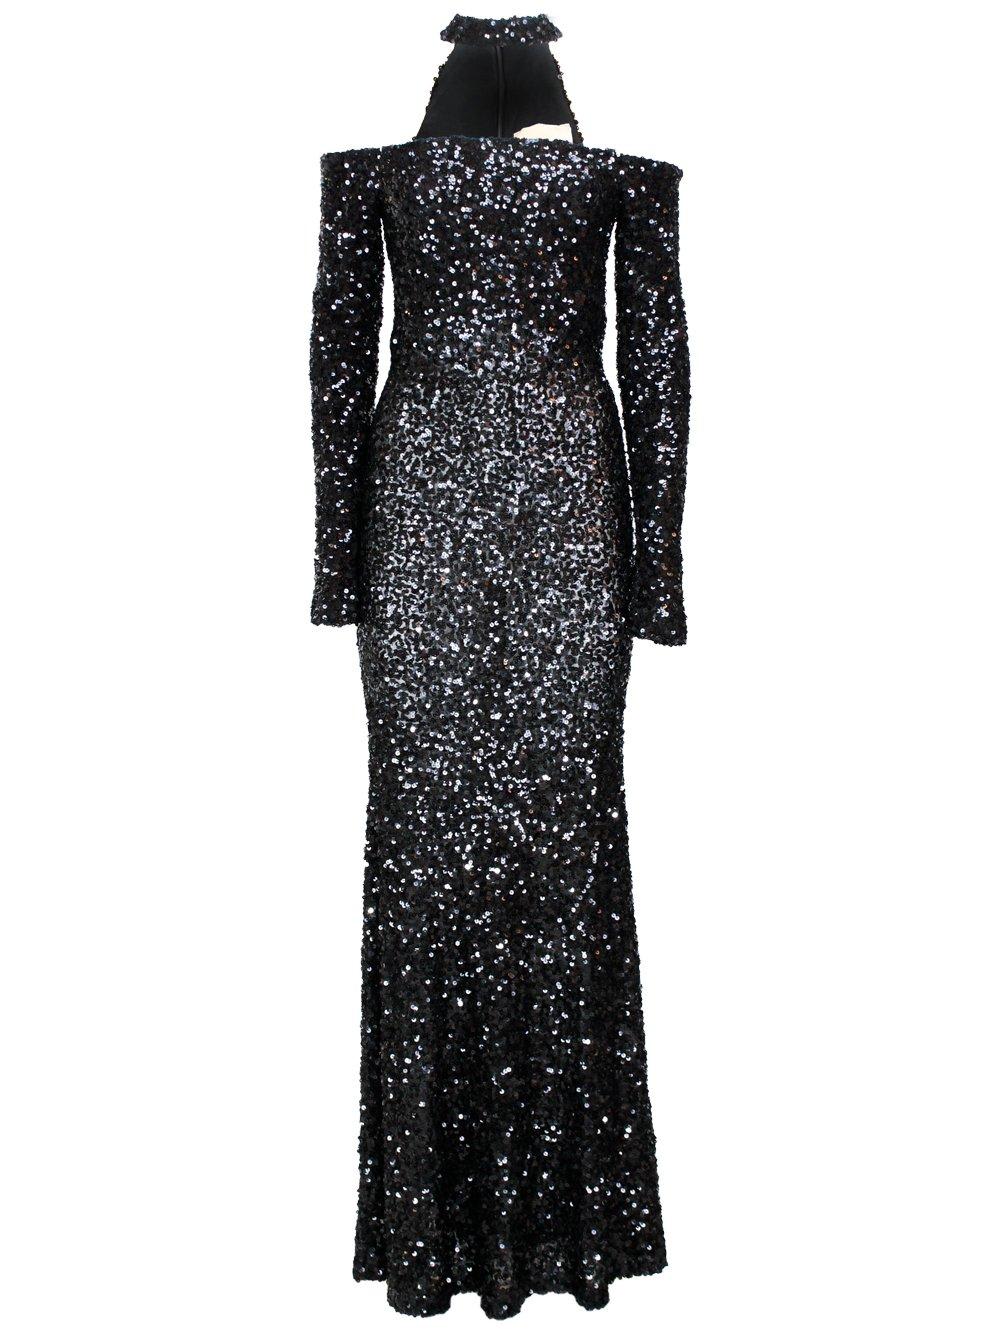 ANIYE BY BIA LONG SEQUINED DRESS